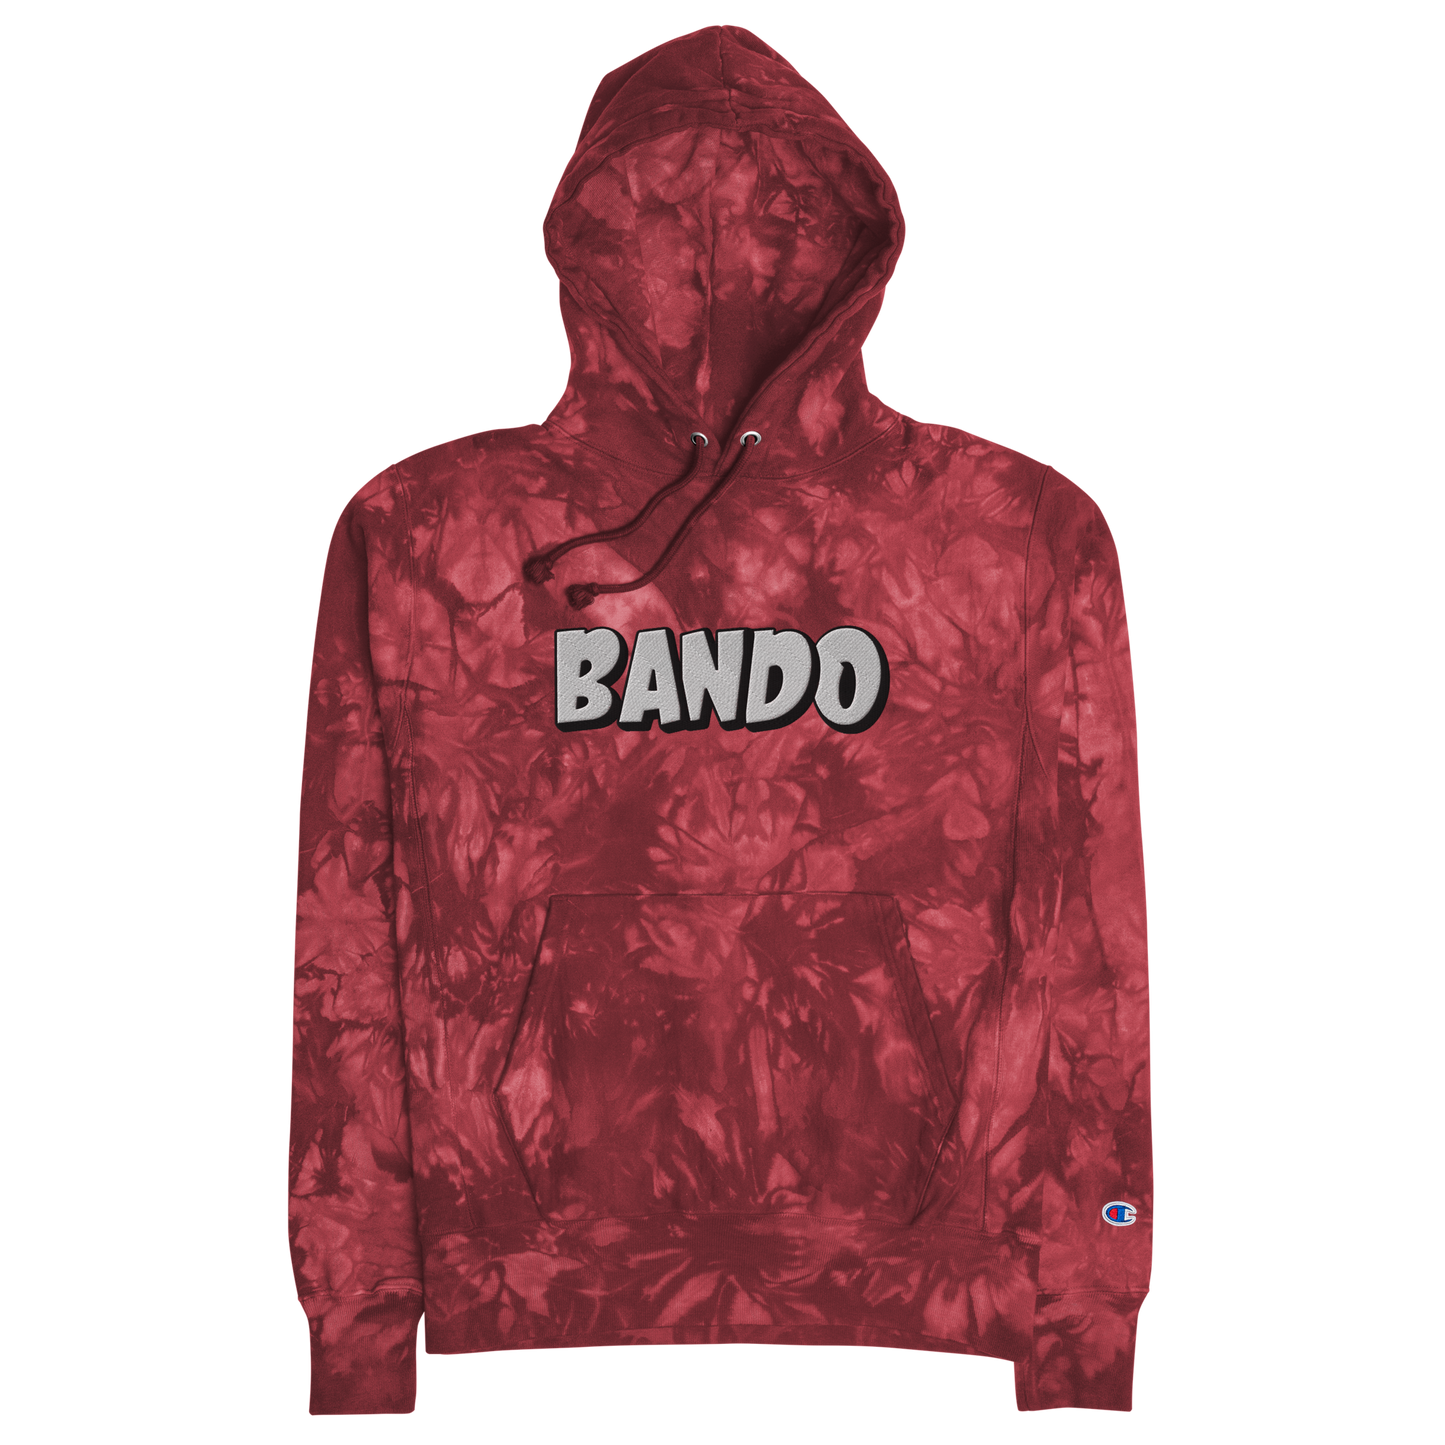 BANDO EMBROIDERED CHAMPION TIE-DYE HOODIE